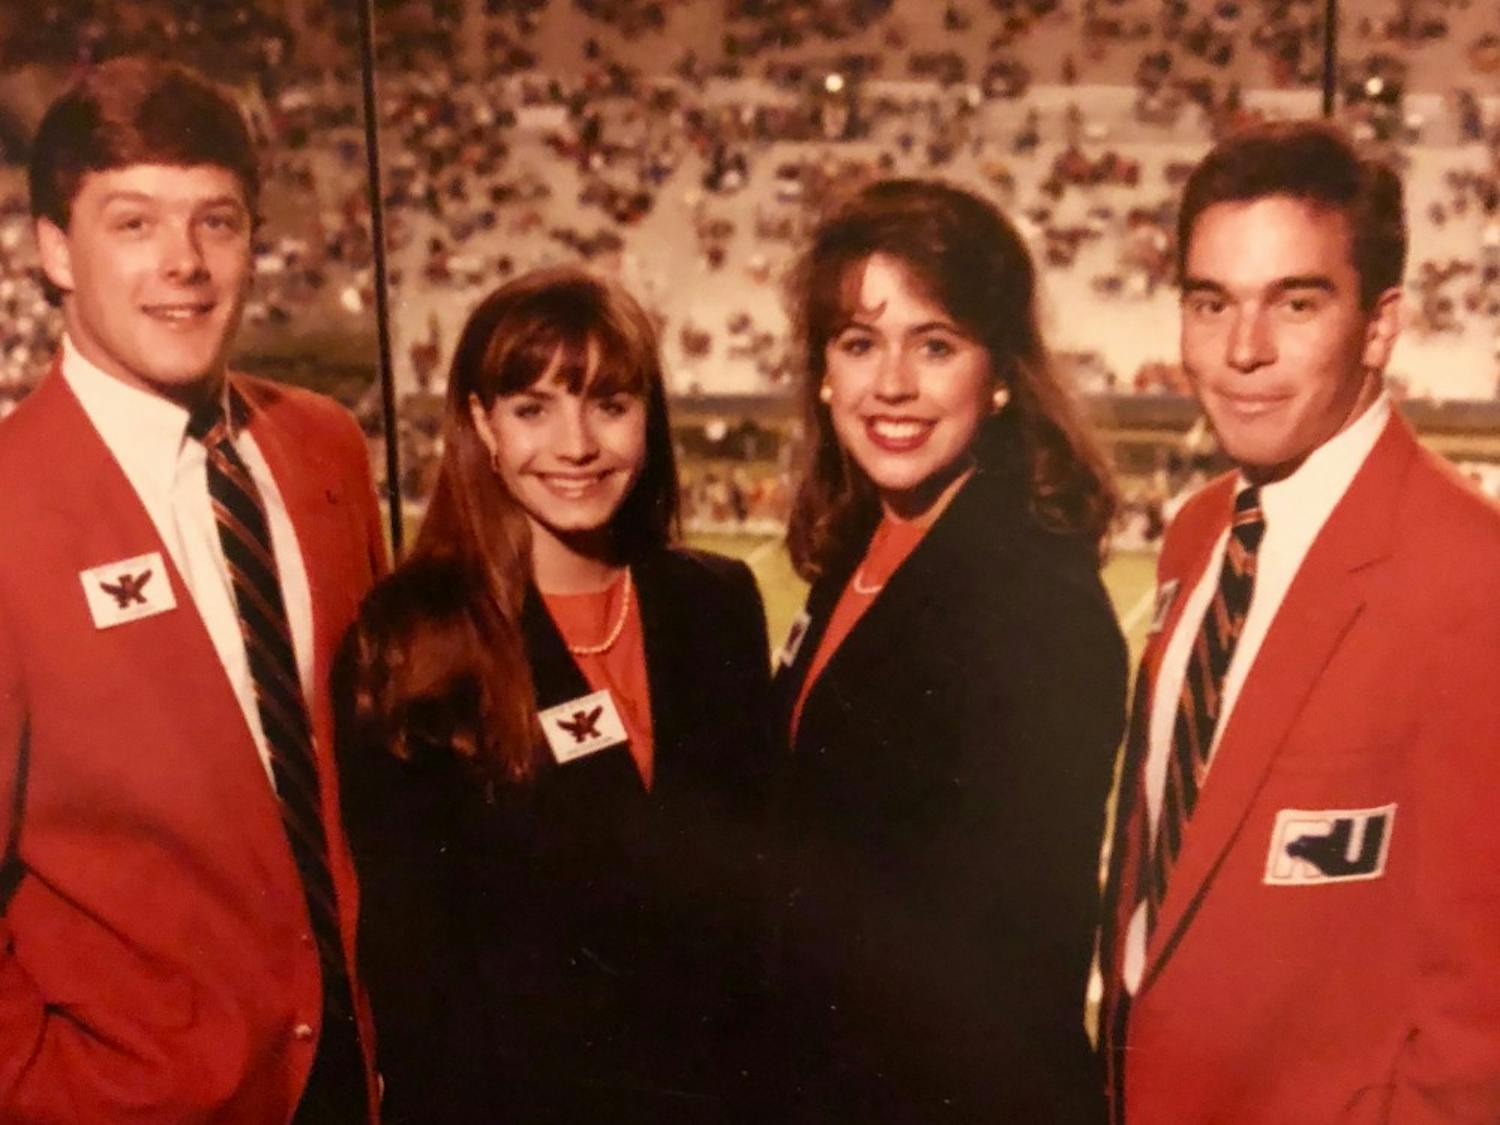 Ashley McCrary, middle-right, was a War Eagle Girl during her time at Auburn.